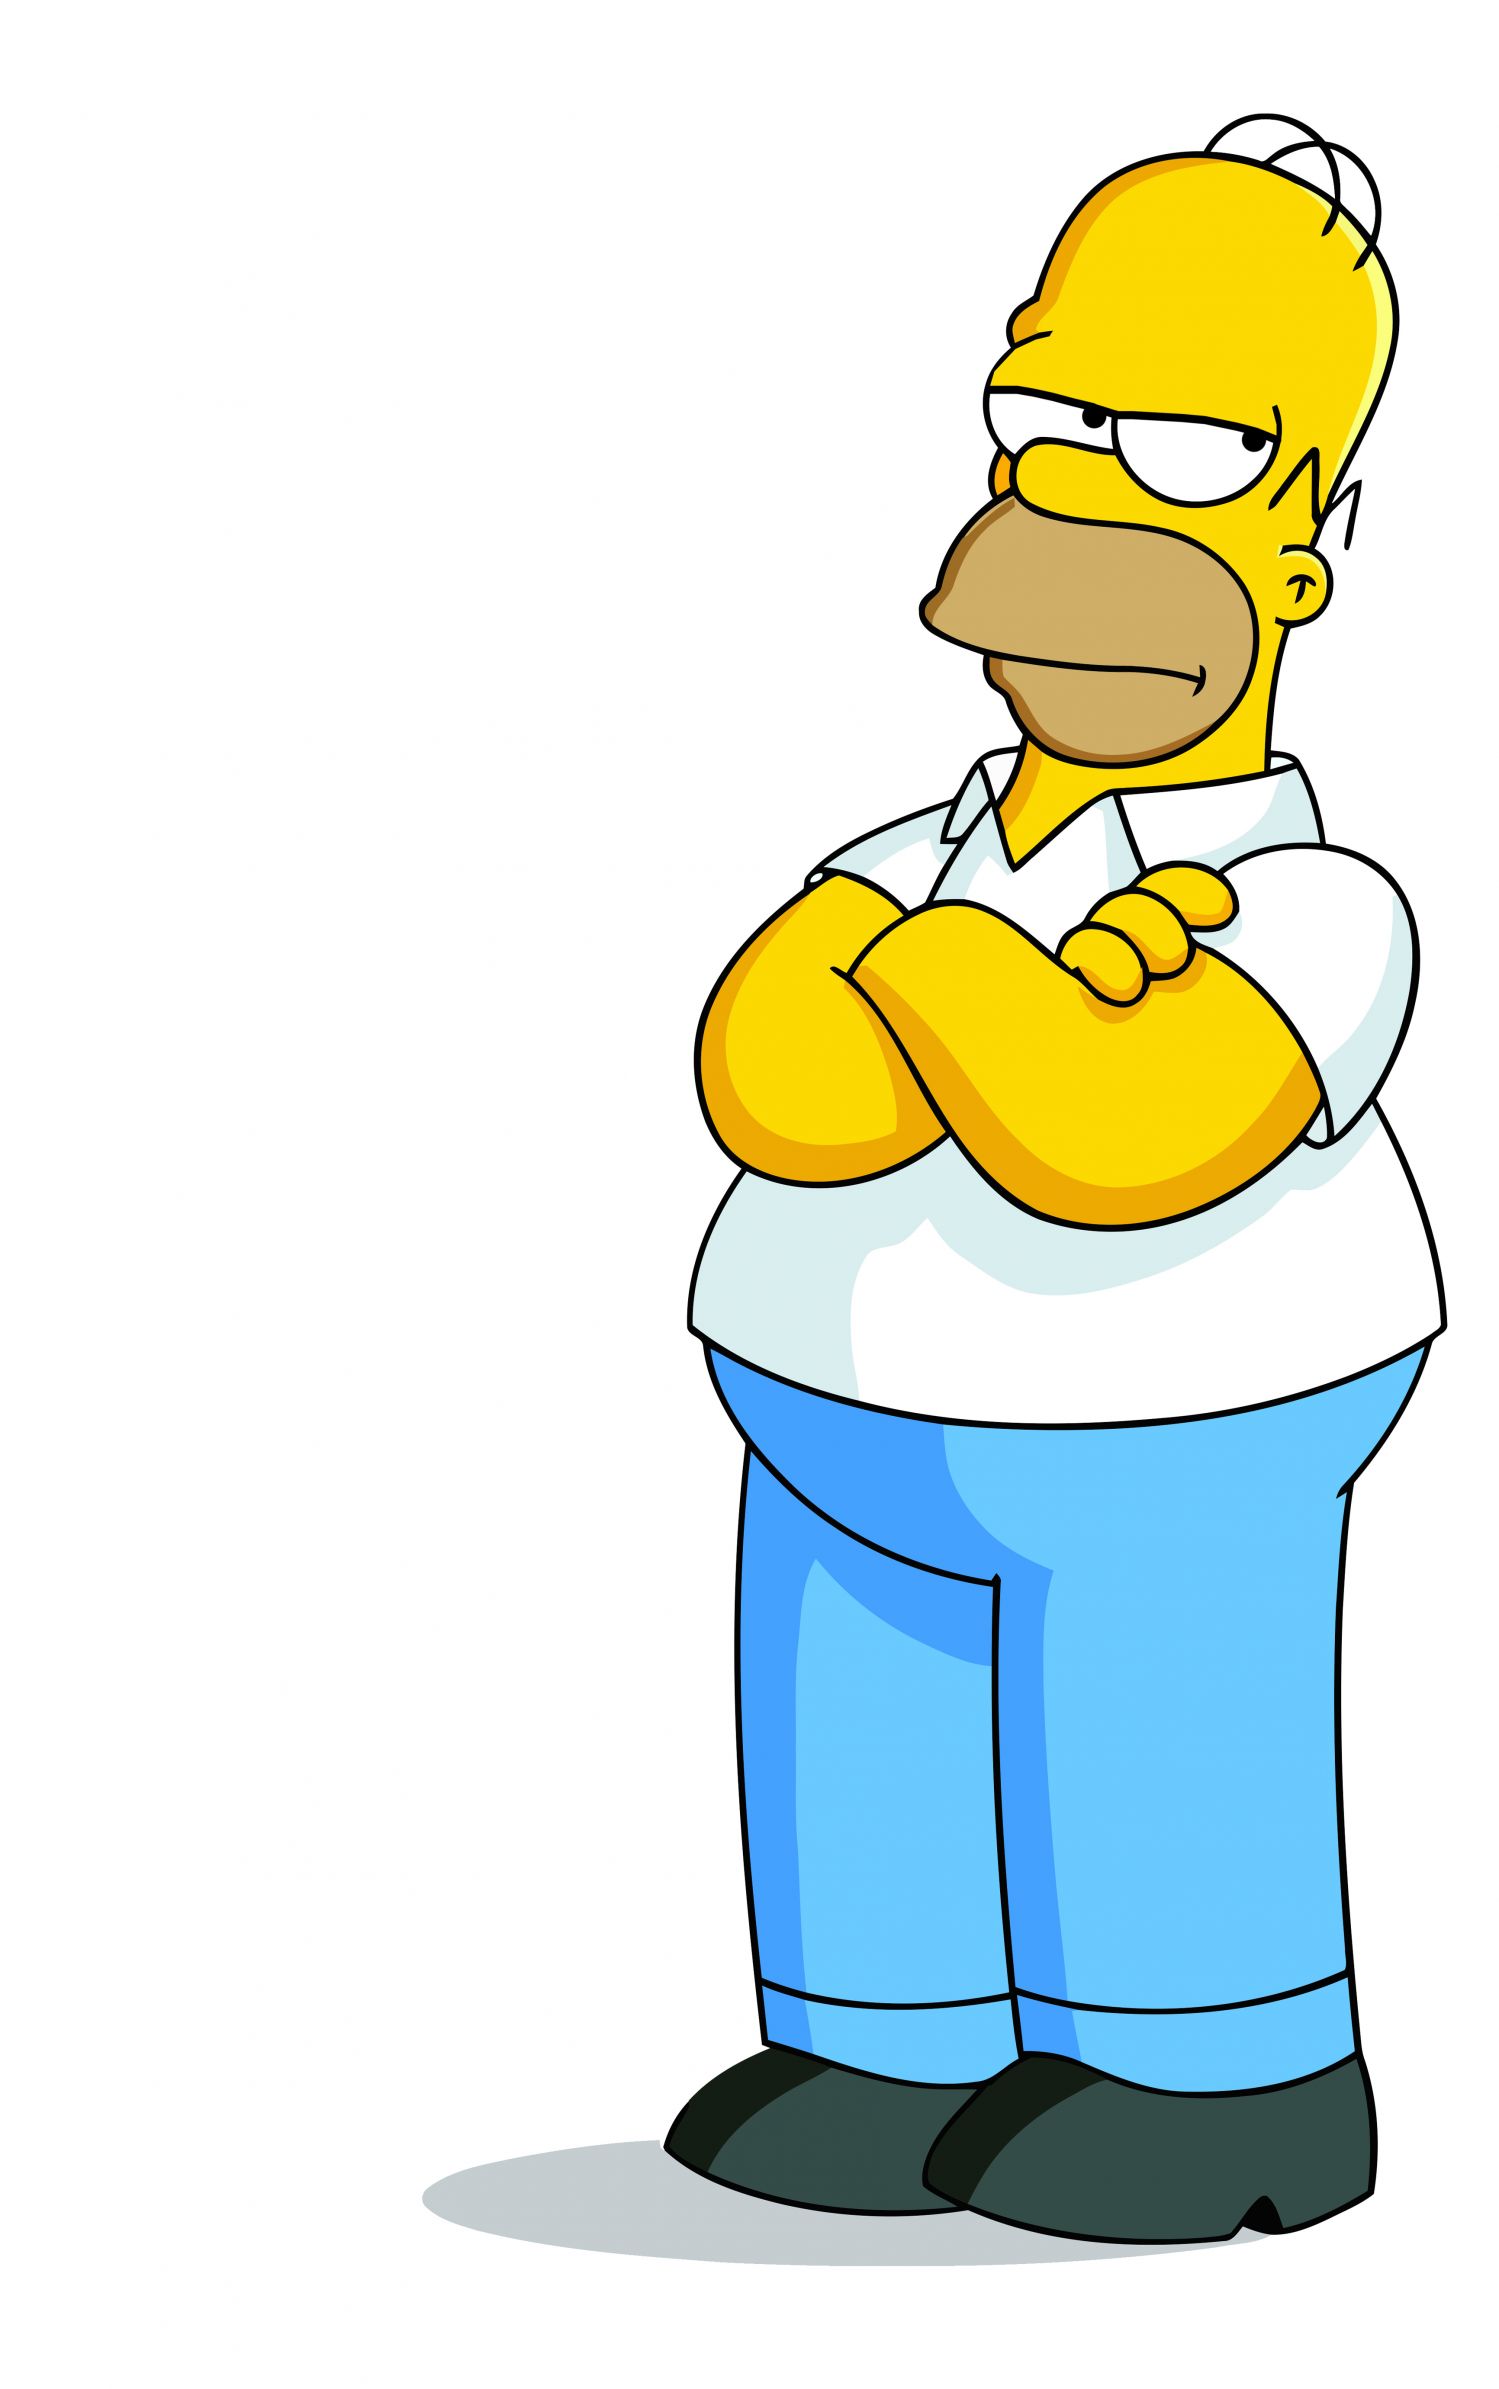 High Quality Homer Simpson Arms Crossed - Pff, Fine, pissed Blank Meme Template